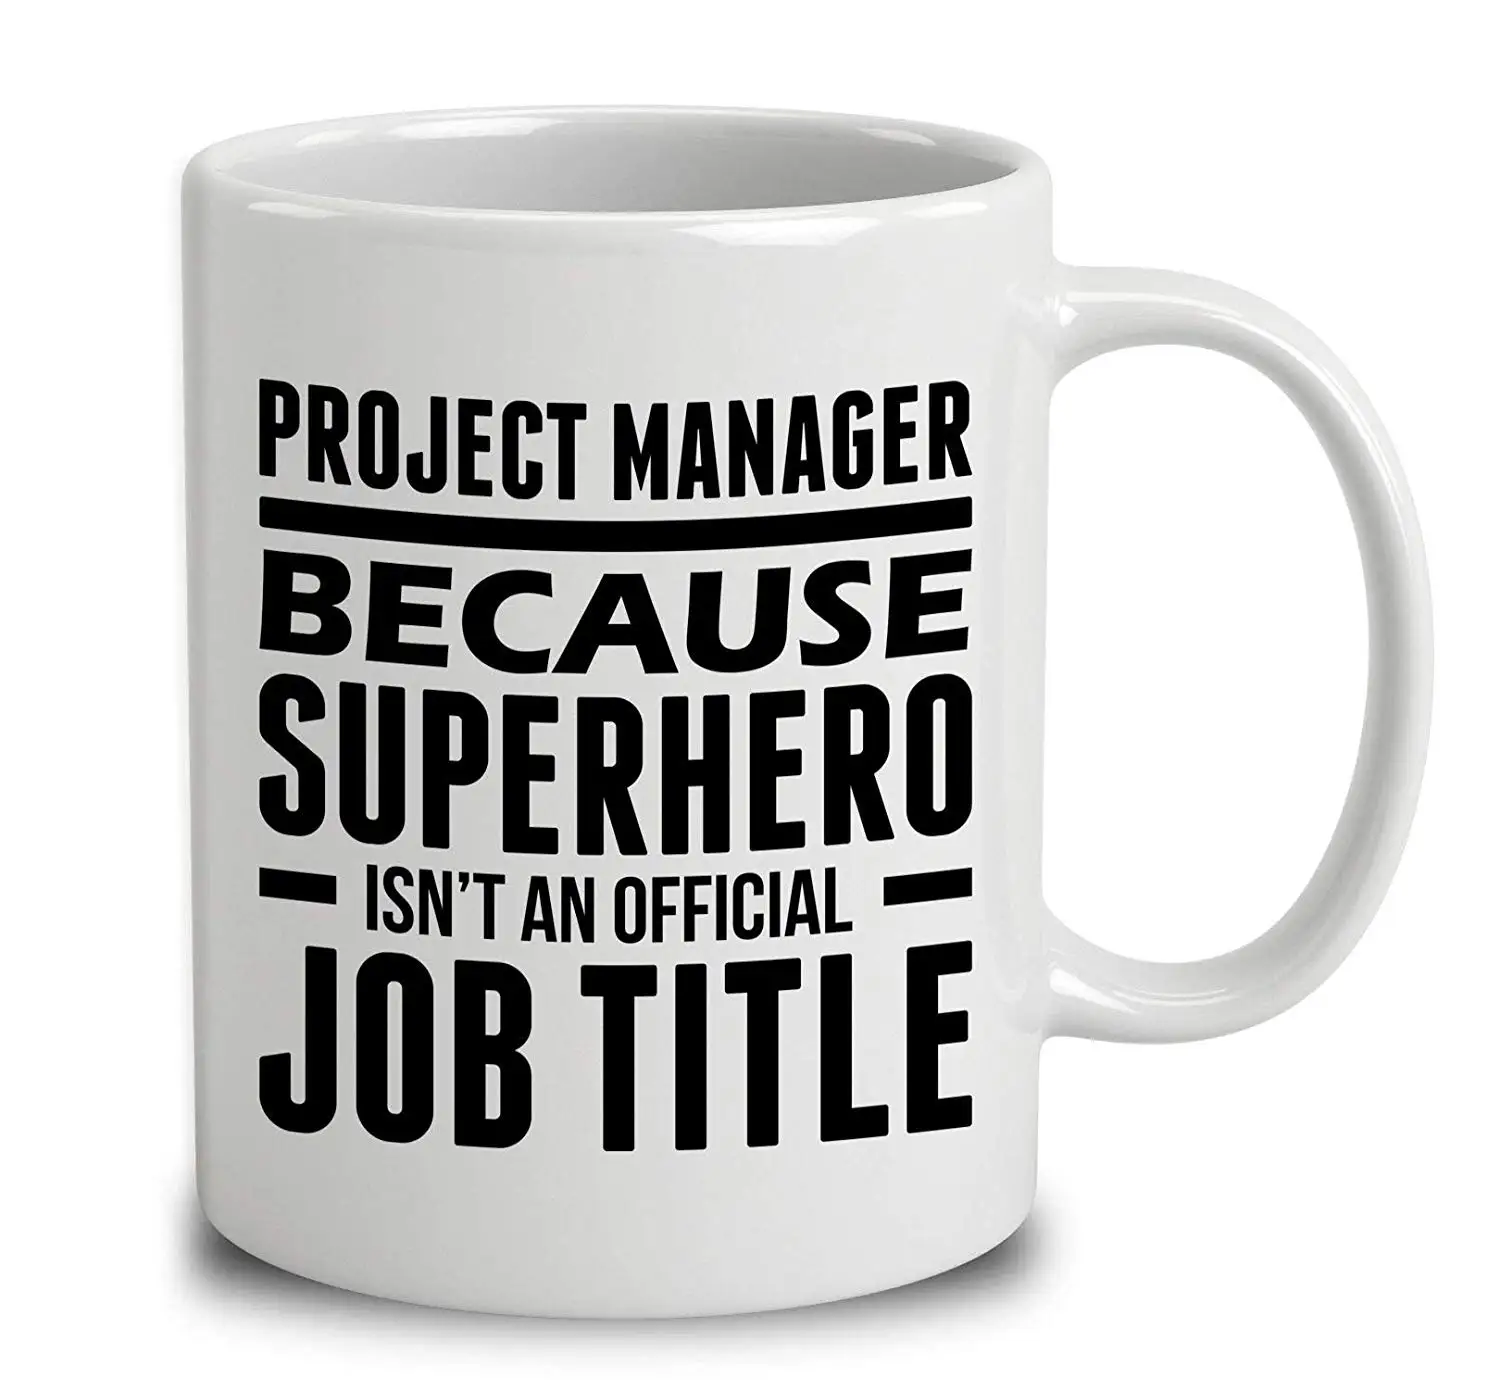 Project Manager Because Superhero Isnt An Official Job Title Coffee Mug (White, 11 oz)